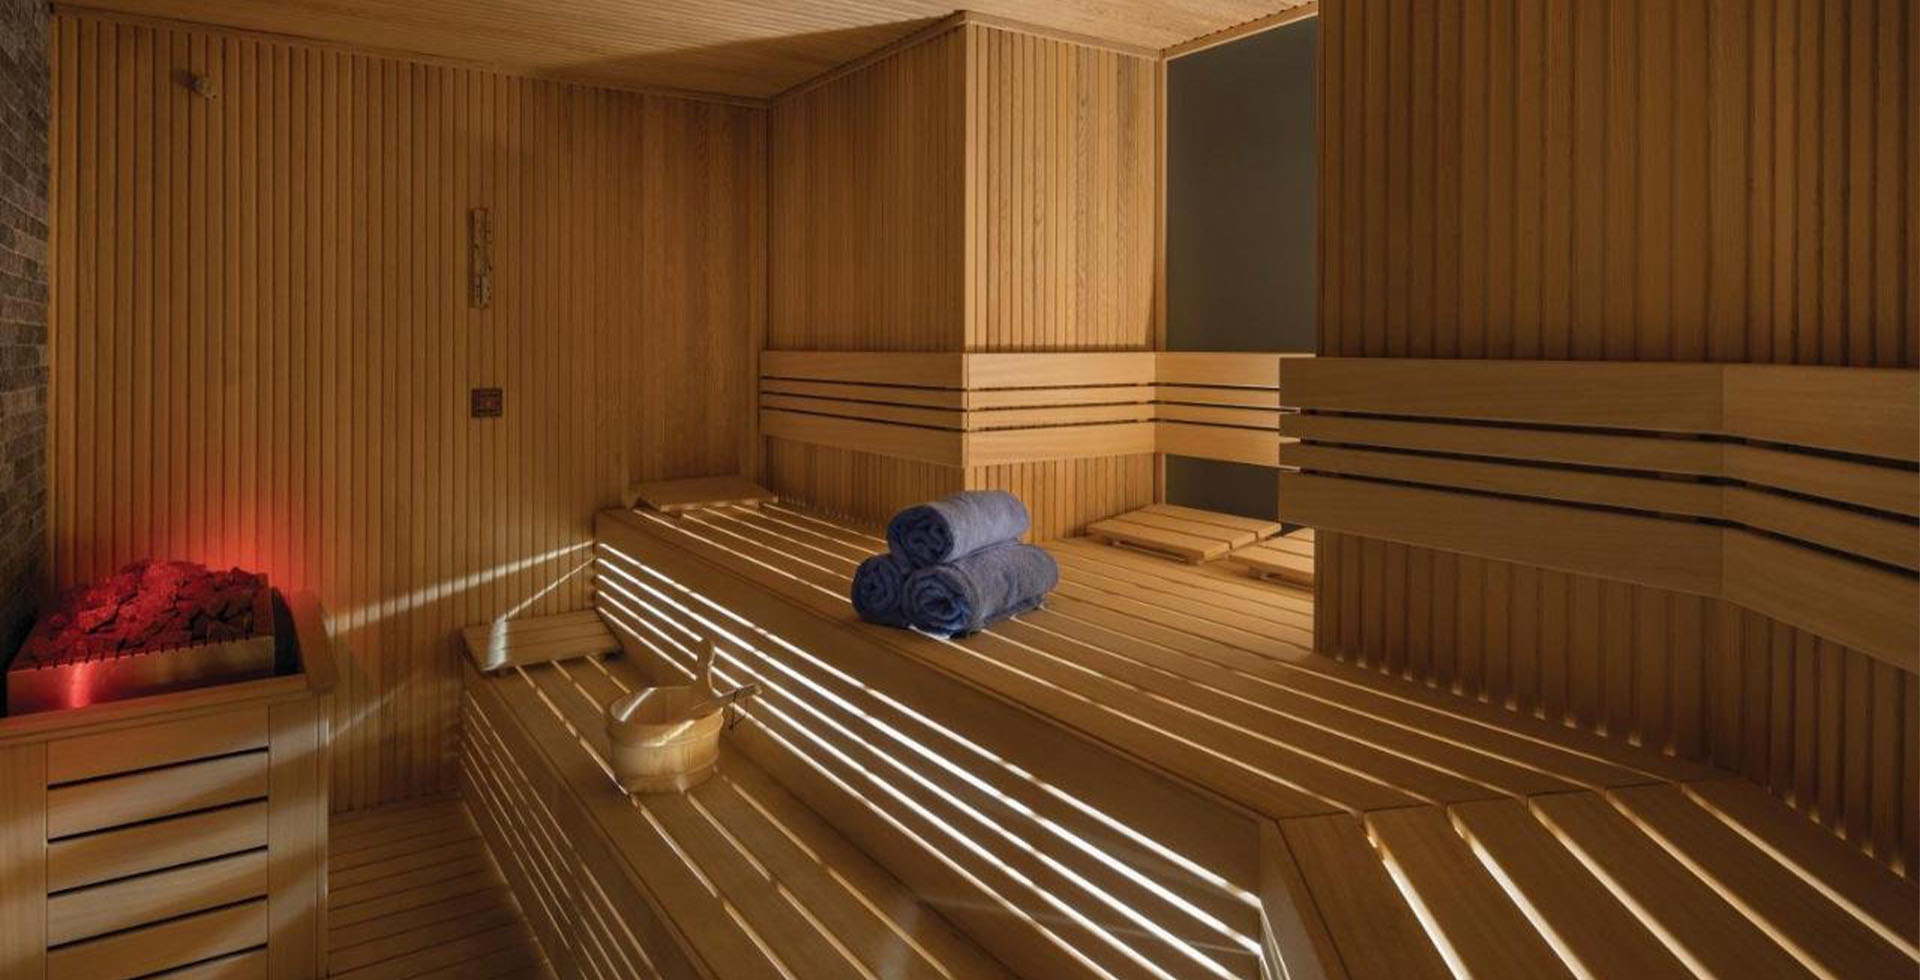 Hilton Hotel Sauna Retreat: Sauna Dekor introduces bespoke sauna excellence, meticulously designed and built to elevate wellness experiences at Hilton Hotels with unparalleled sophistication.